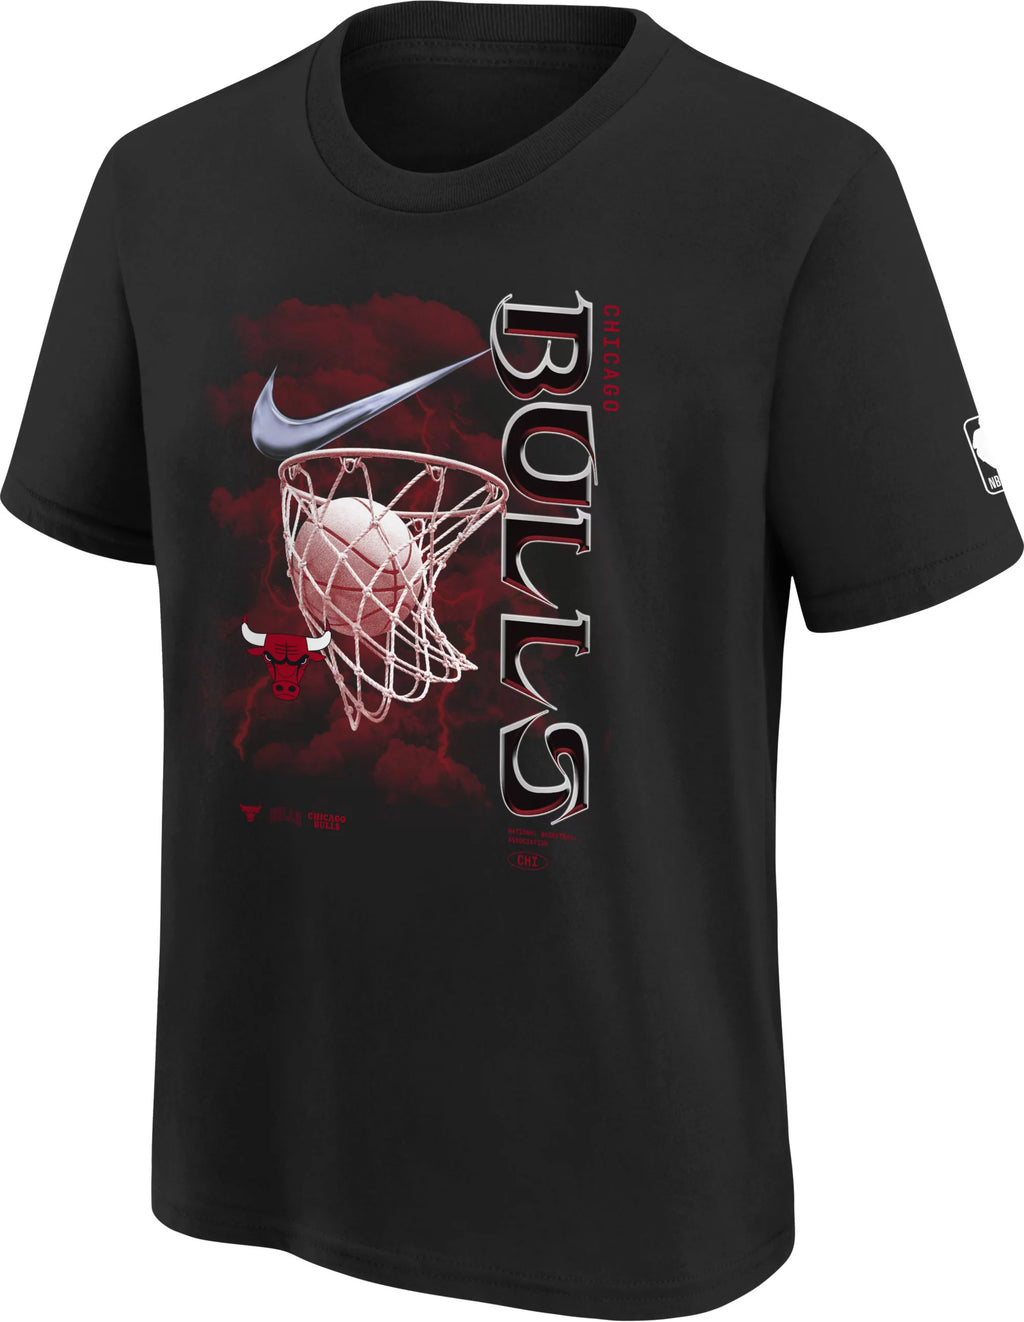 Youth Nike Court Side City Edition Graphic T-Shirt - Chicago Bulls